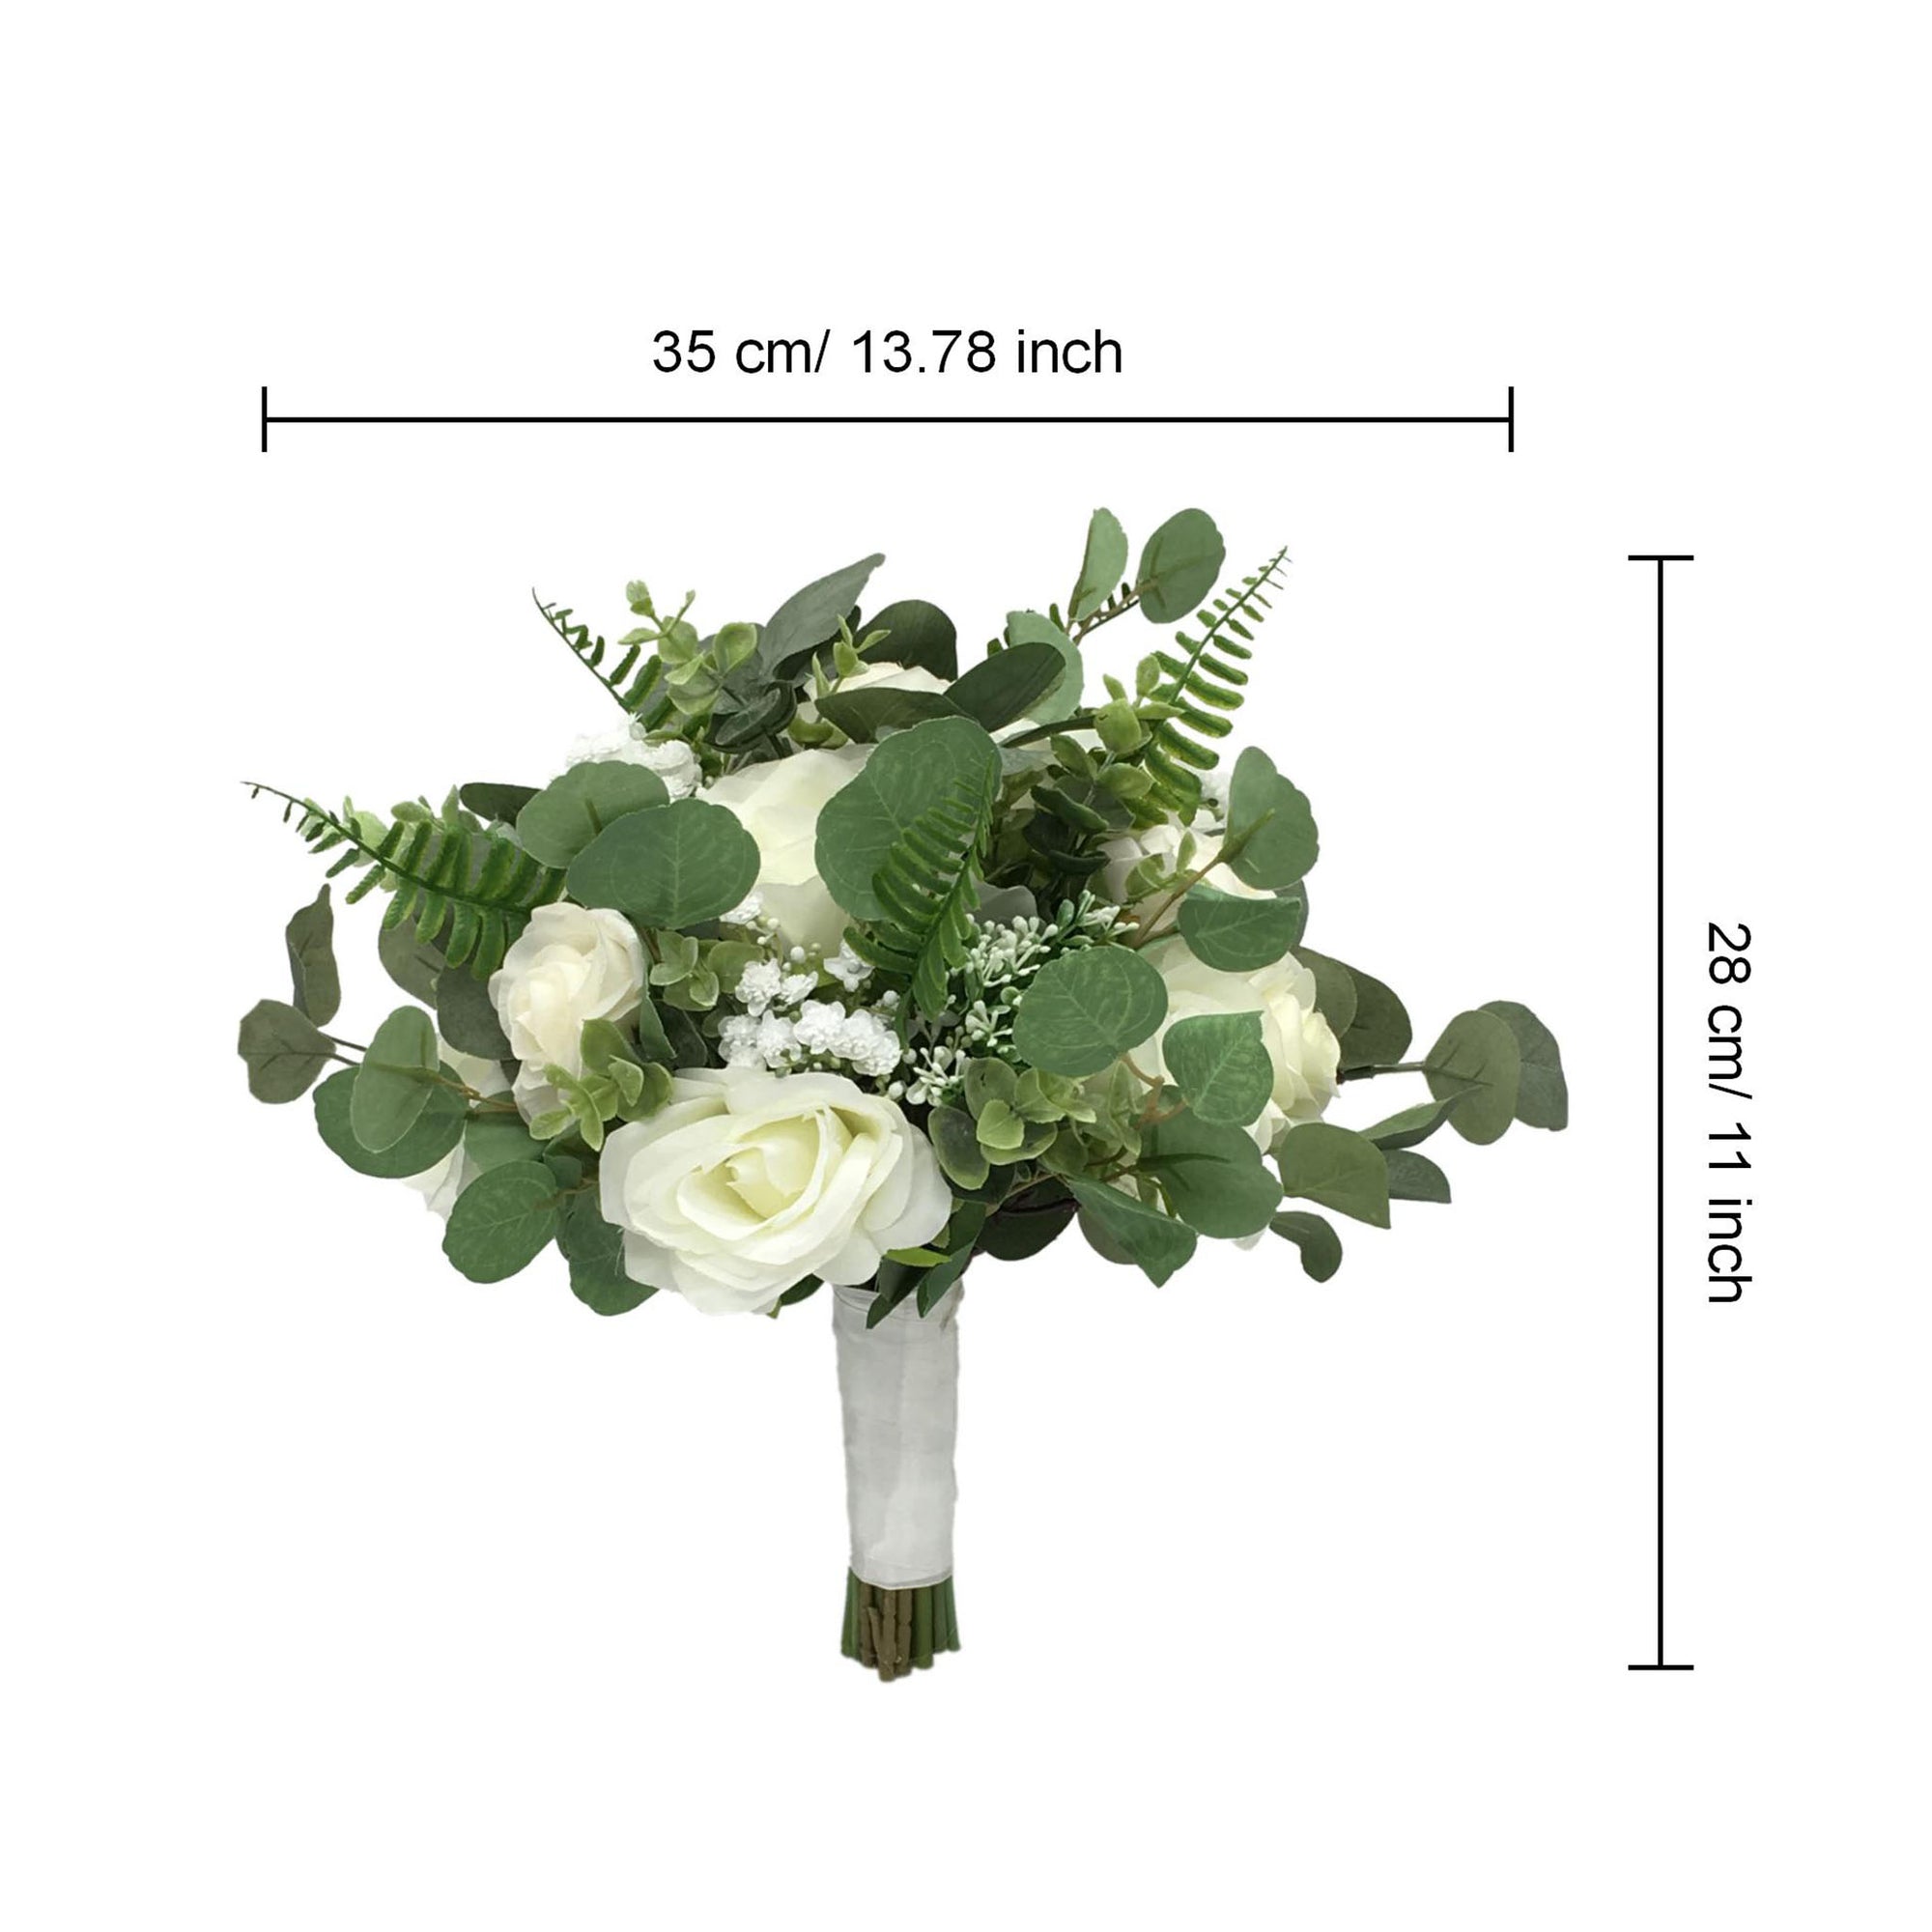 Rustic Bridal Bouquet Faux Greenery Eucalyptus Ivory Roses